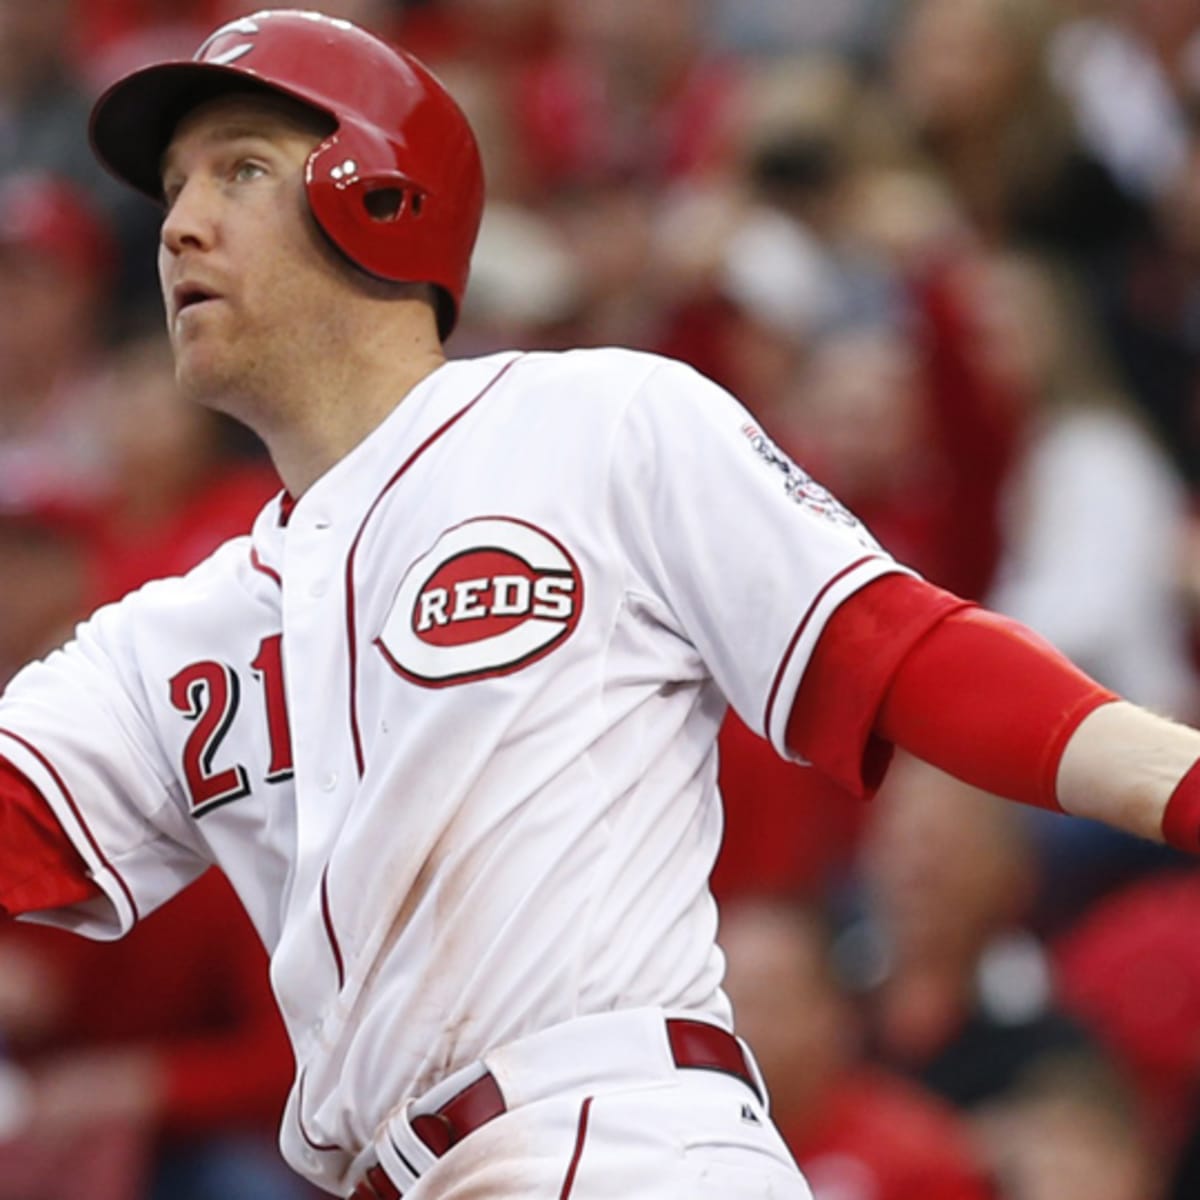 He's back home again': Todd Frazier's career comes full circle